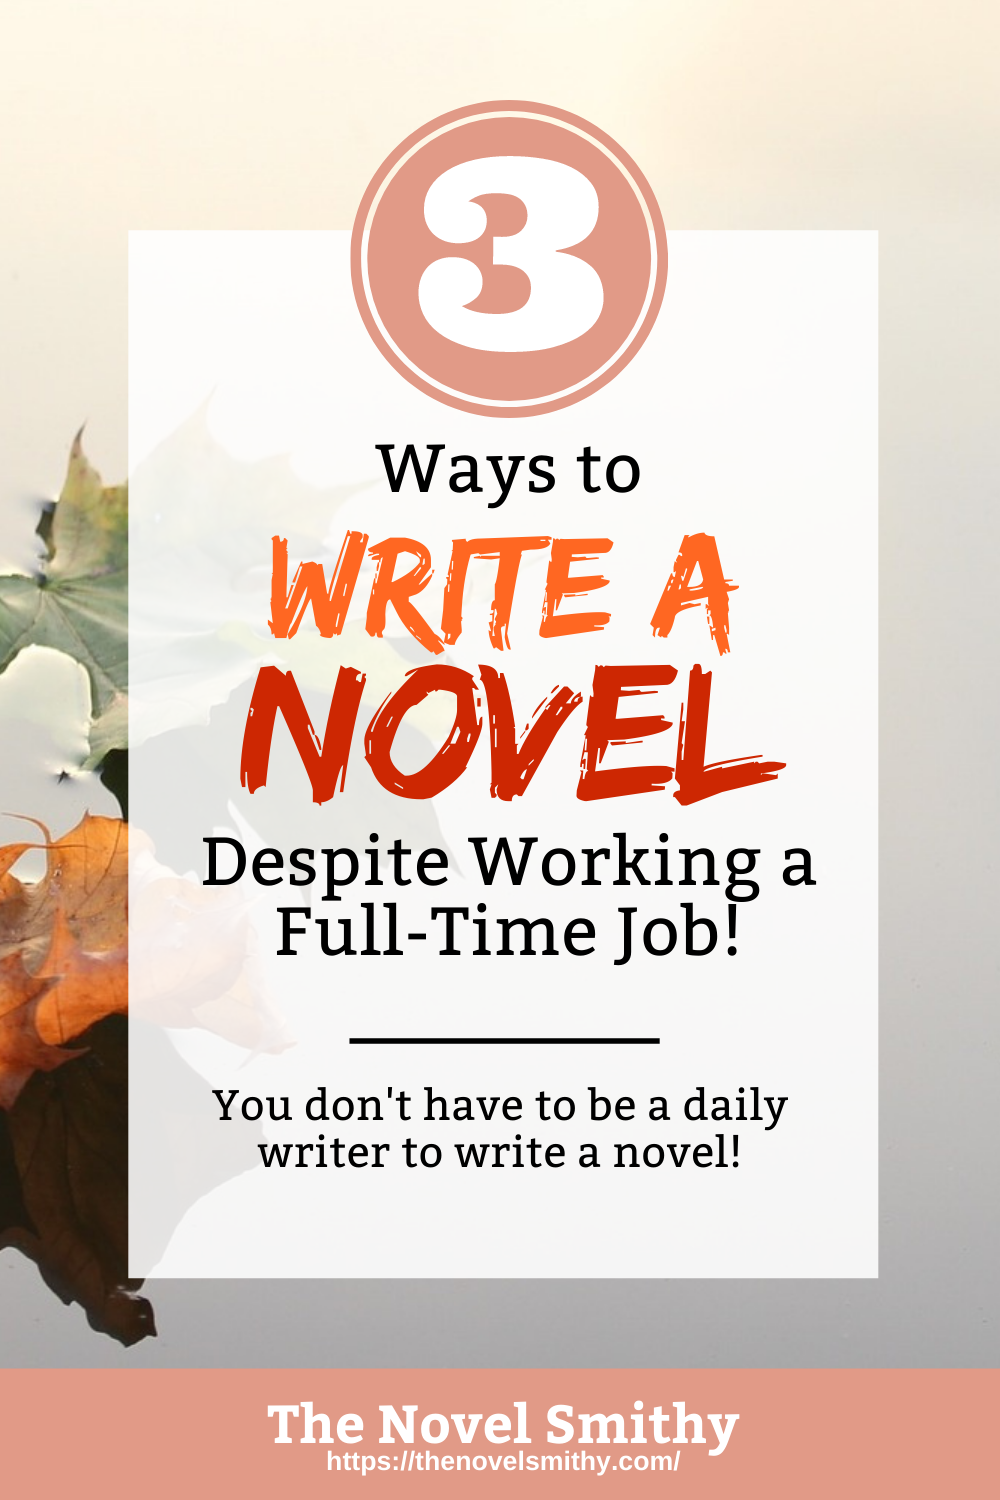 3 Ways to Write a Novel With a Full-Time Job